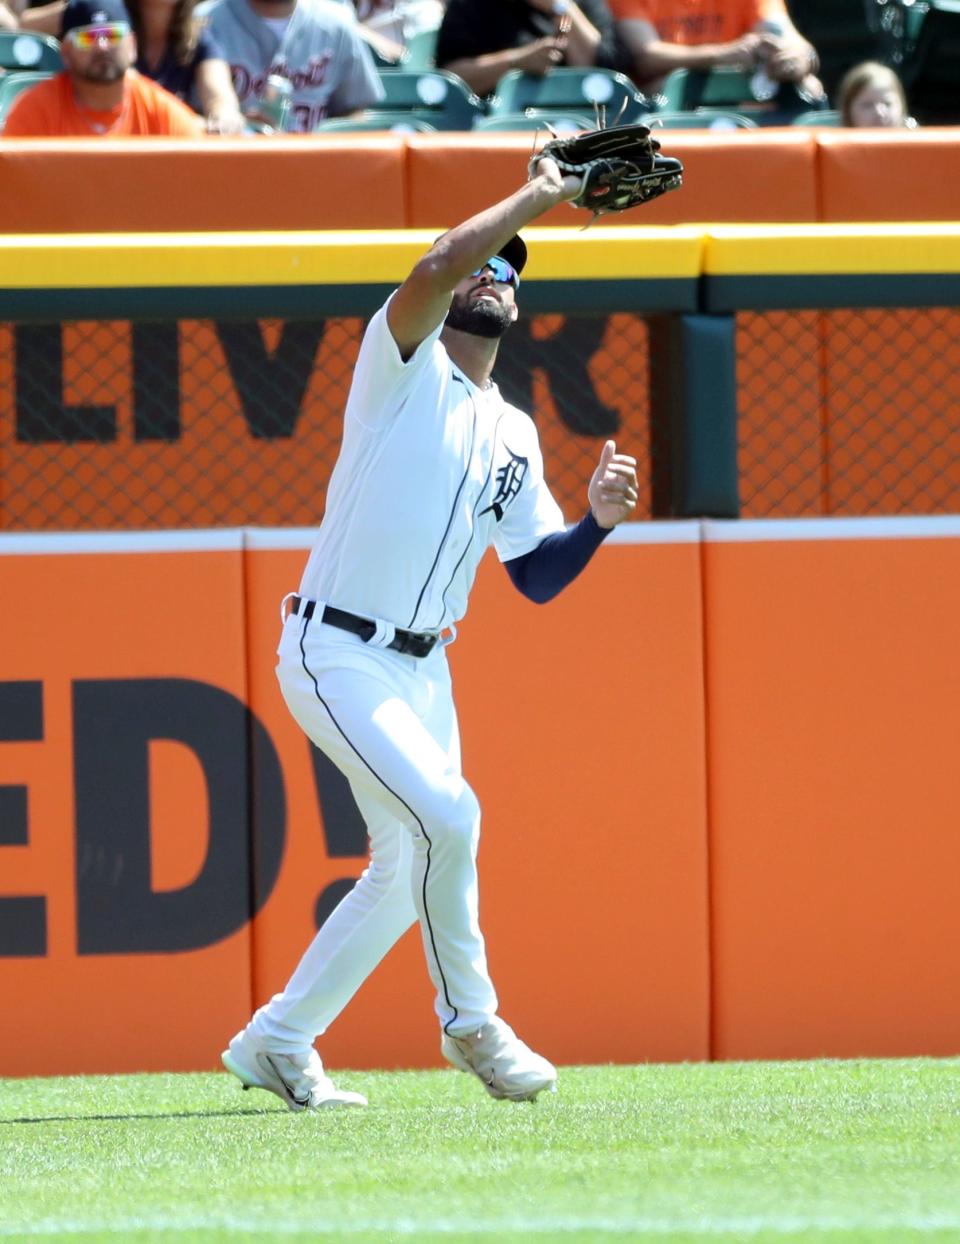 Detroit Tigers left fielder Riley Greene (31) catches a flyball hit by Houston Astros DH Yordan Alvarez (44) during first-inning action at Comerica Park in Detroit on Sunday, Aug. 27, 2023.